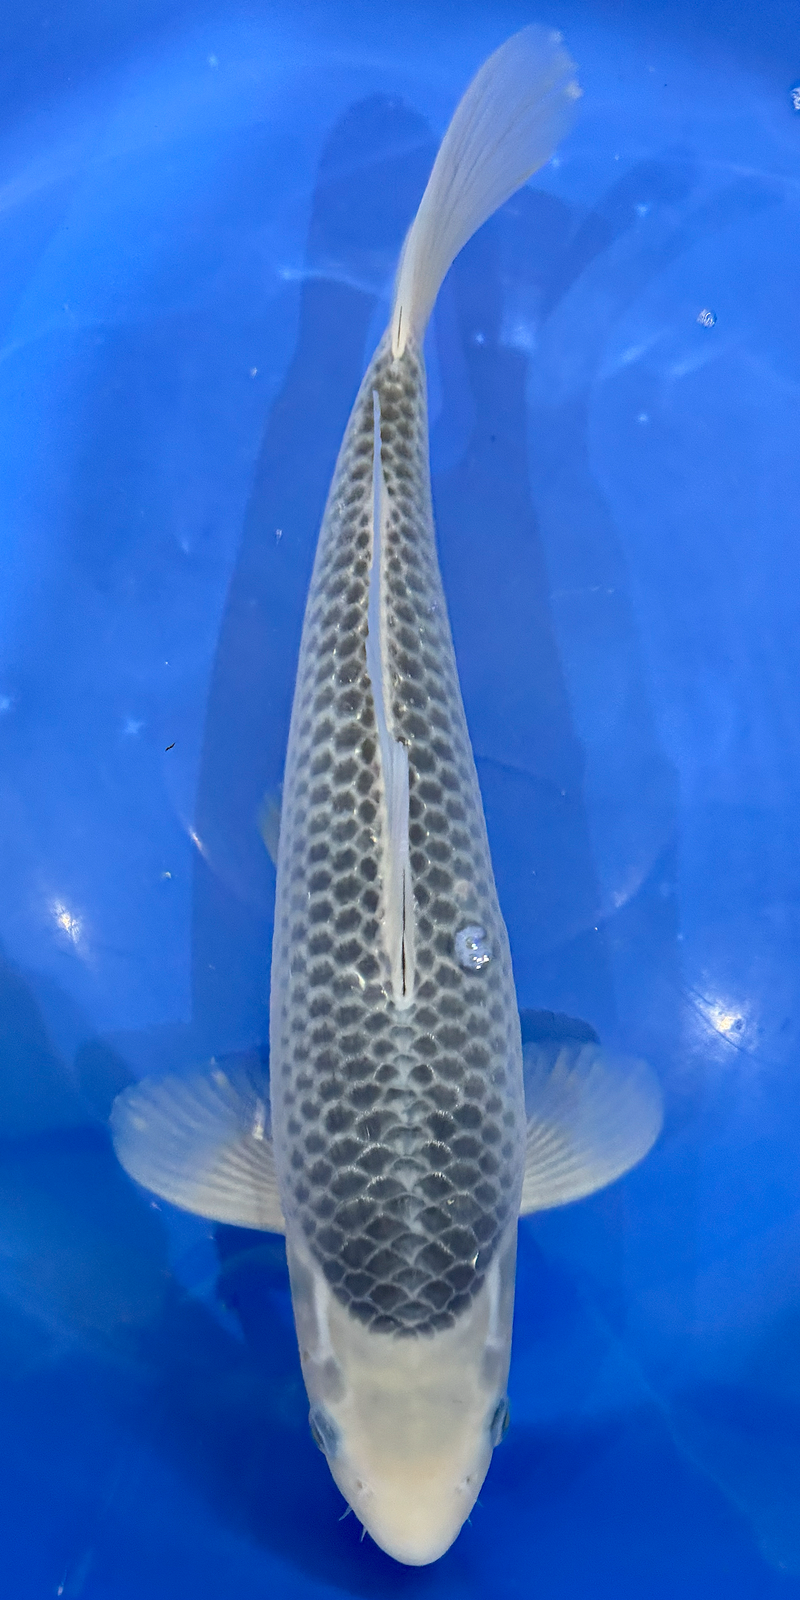 Japanese Koi from the breeder Oya. Beautiful Asagi with great body and development potential. Age Nisai.